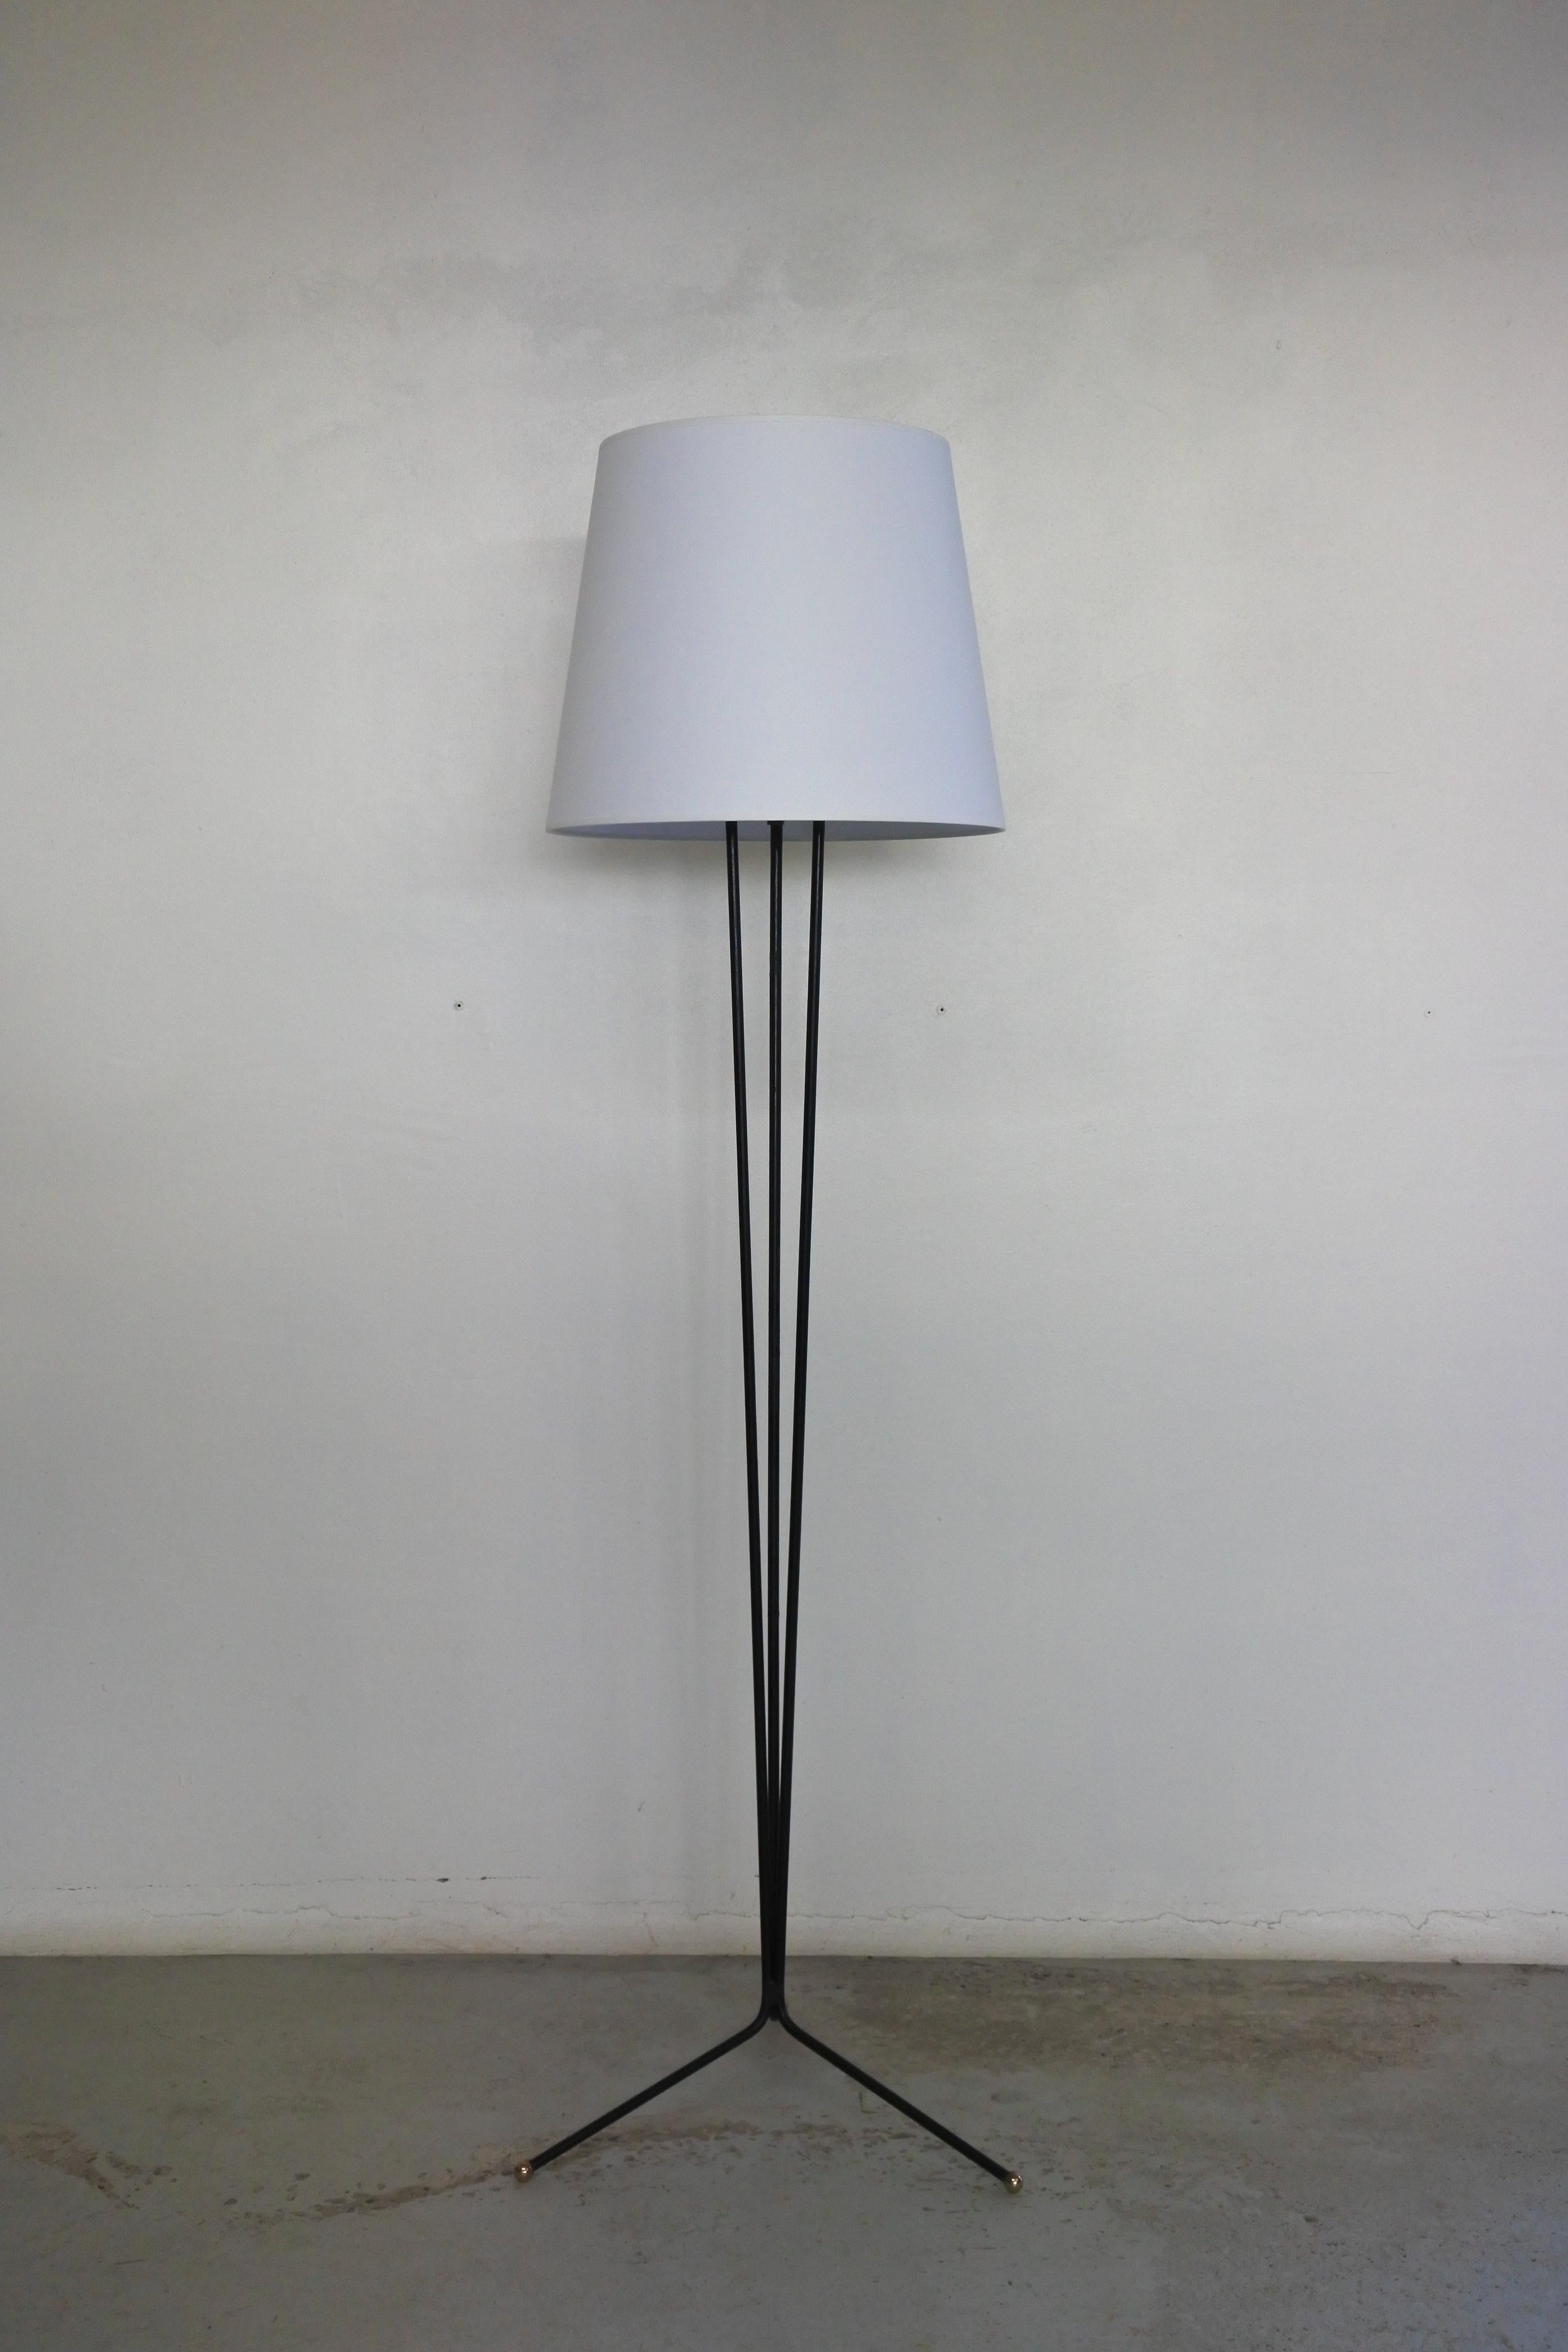 French Mid-Century Modern floor lamp 
Black lacquered metal with brass accents
1950s.